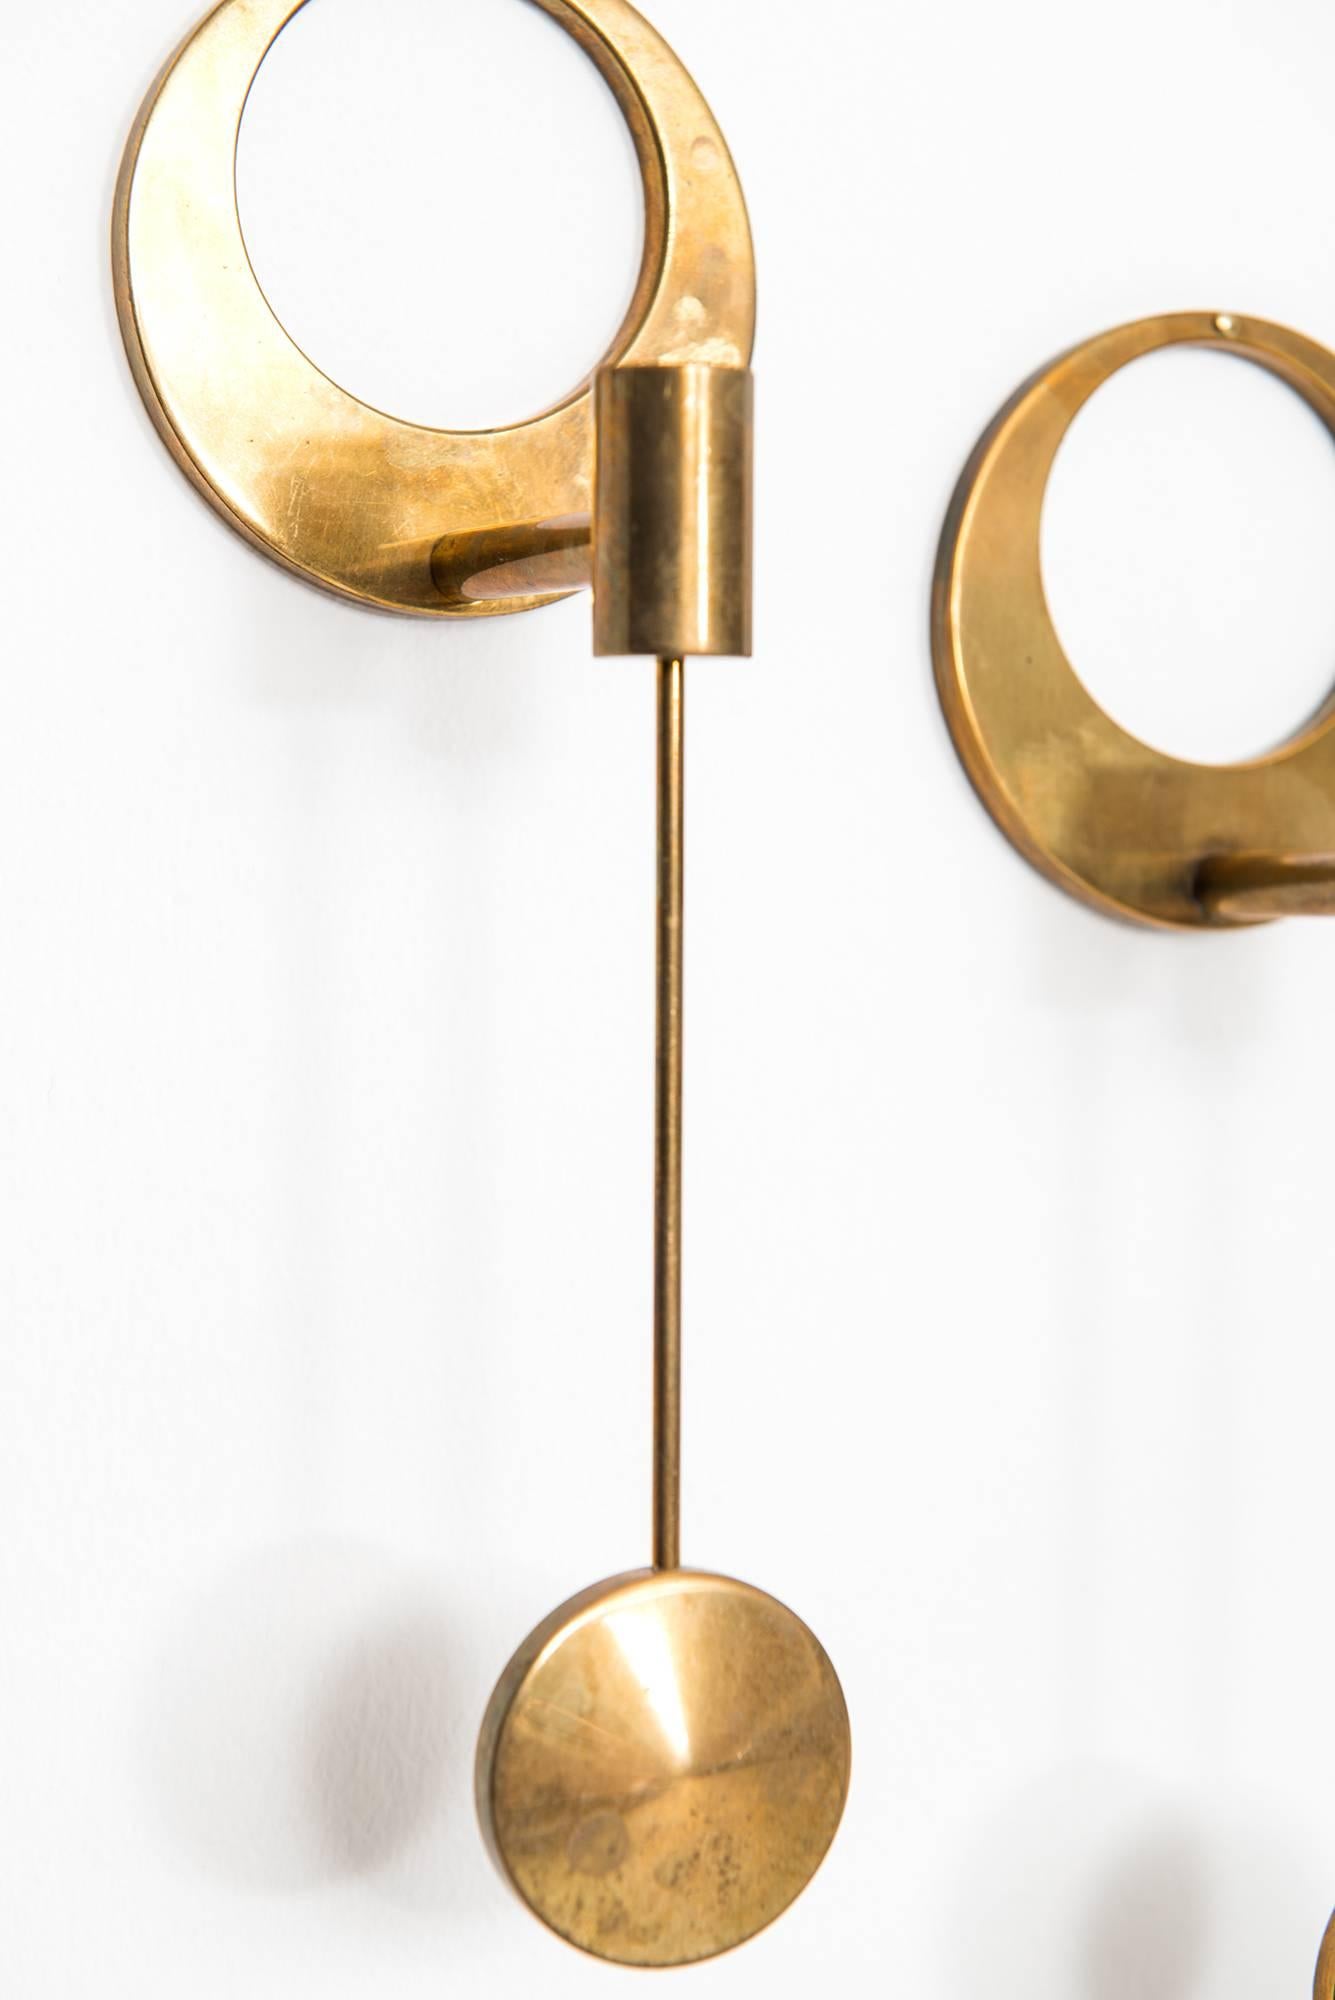 Rare wall hanged candlesticks designed by Arthur Pe. Produced by his own studio Kolbäck in Sweden.